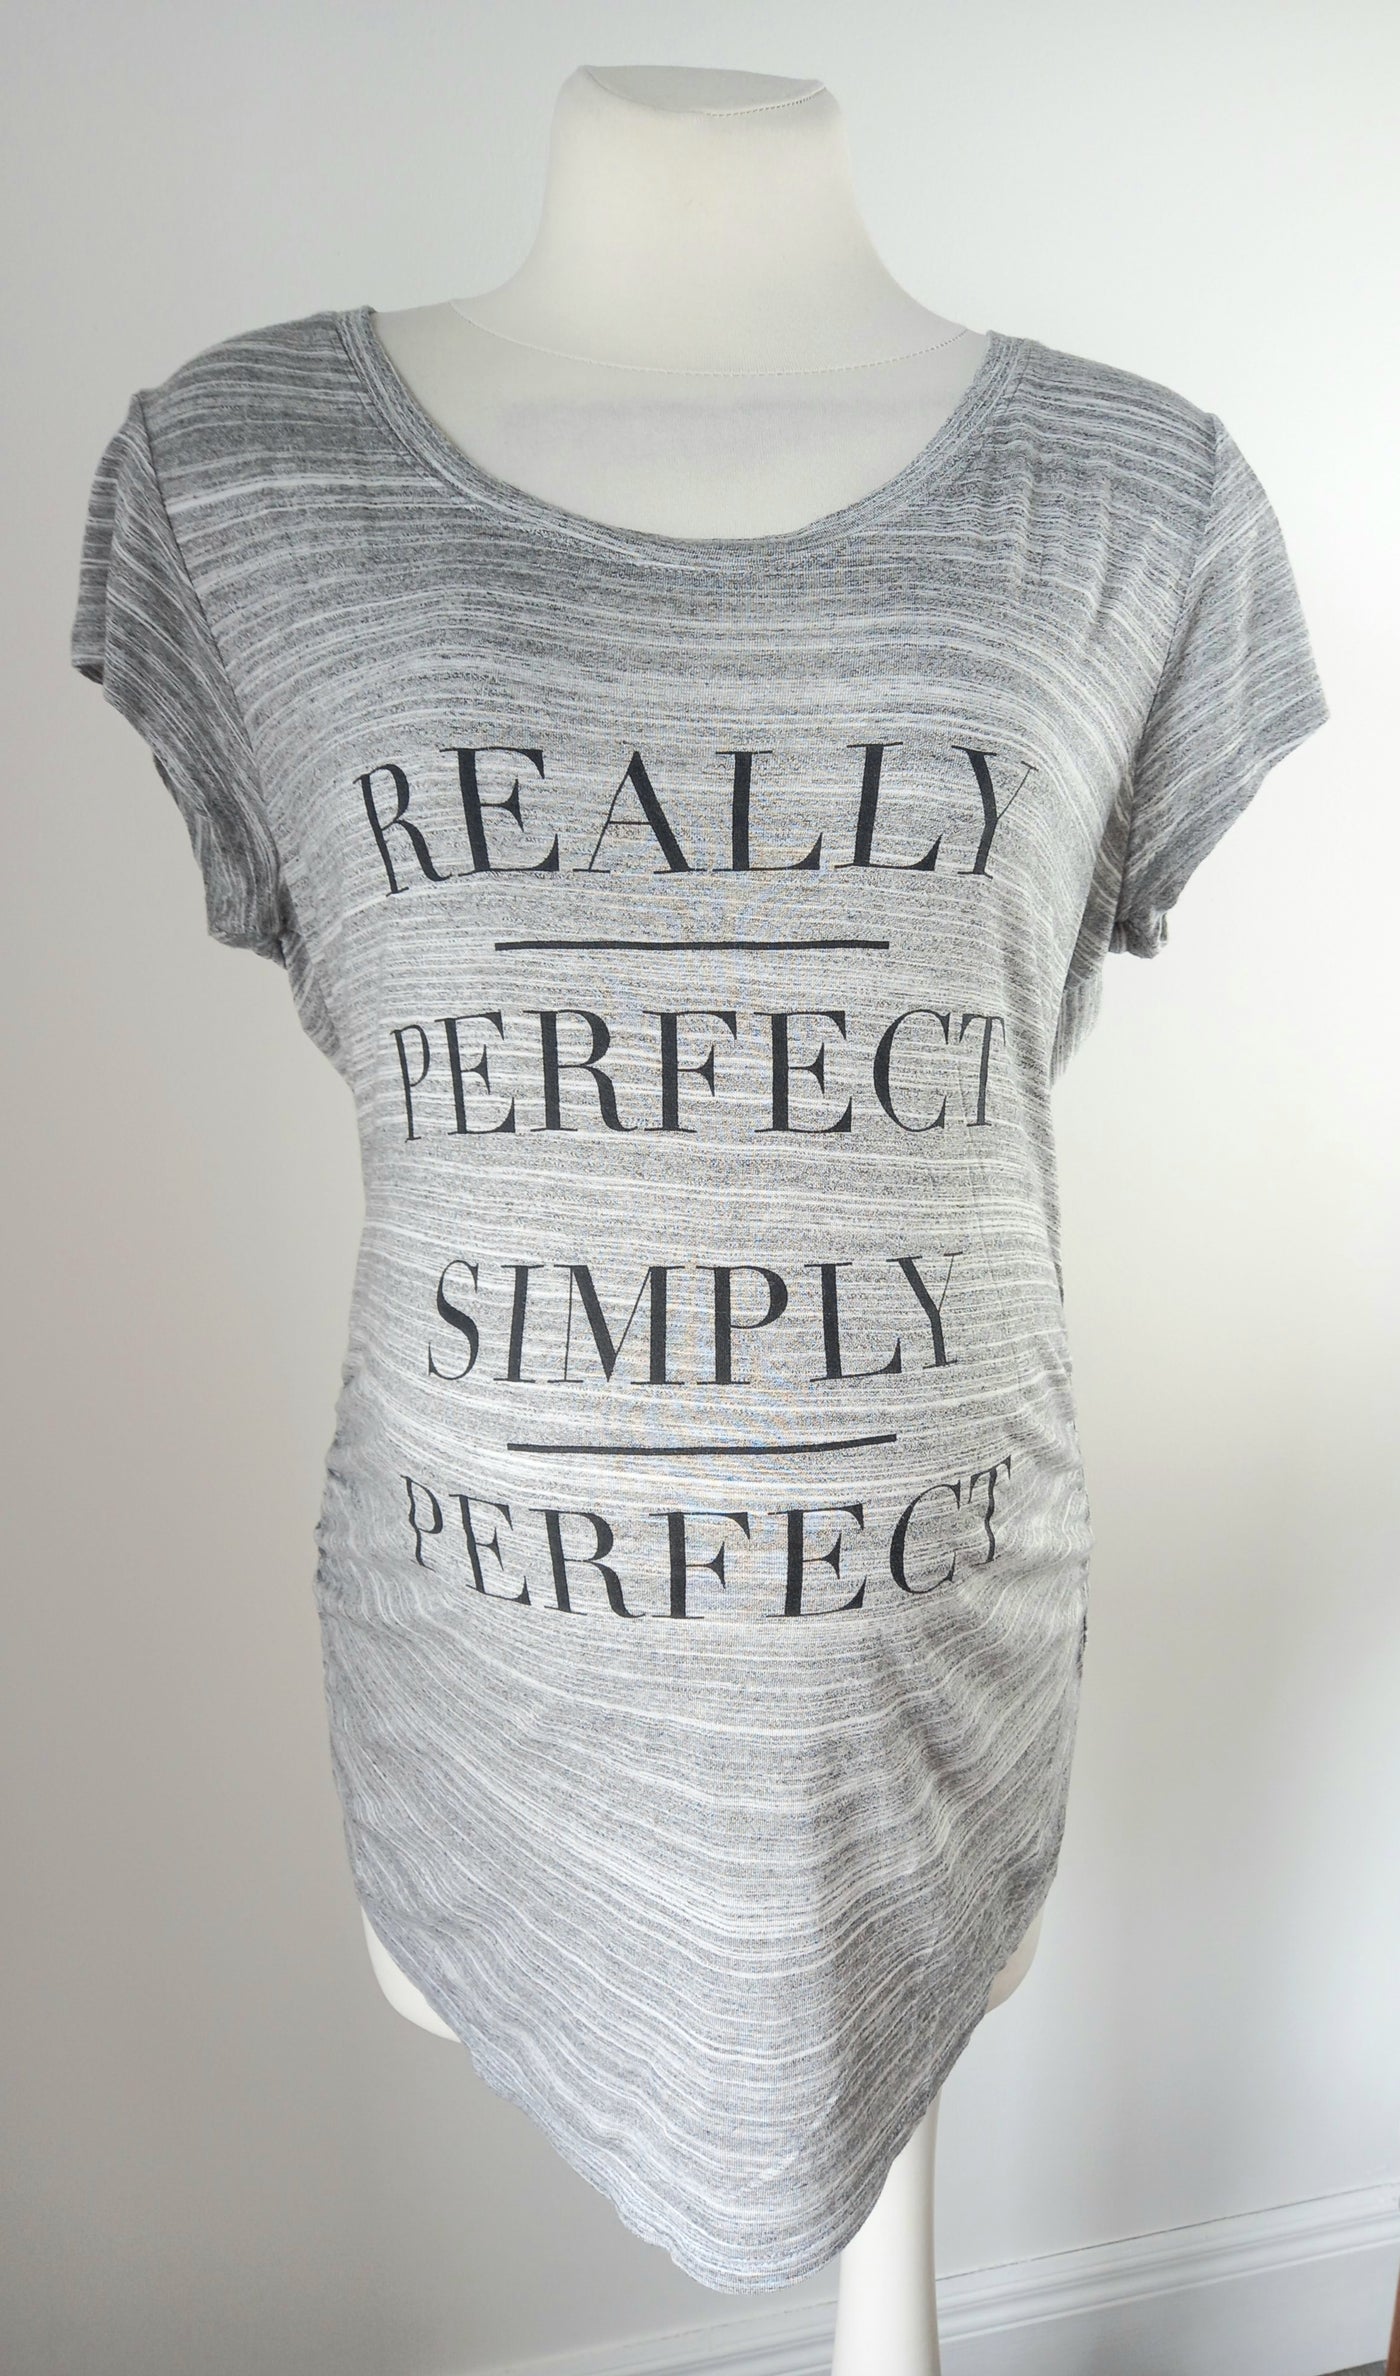 H&M Mama Grey 'Really Perfect' top - Size M (Approx UK 10/12)